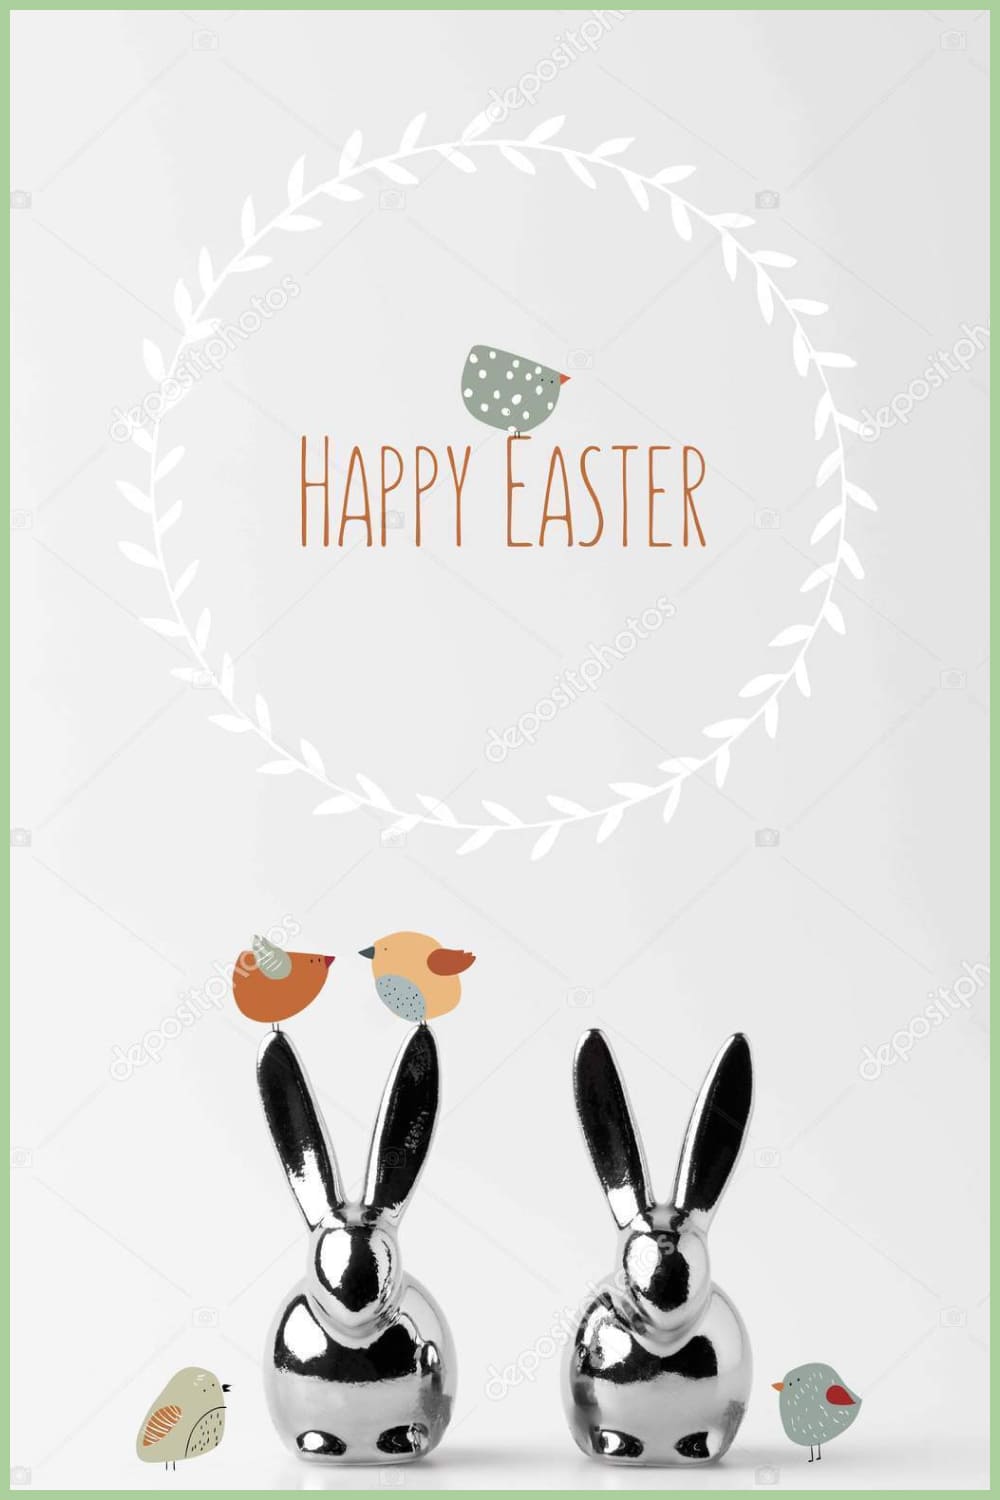 Two statuettes of easter bunnies with drawn birds and happy easter lettering on white.